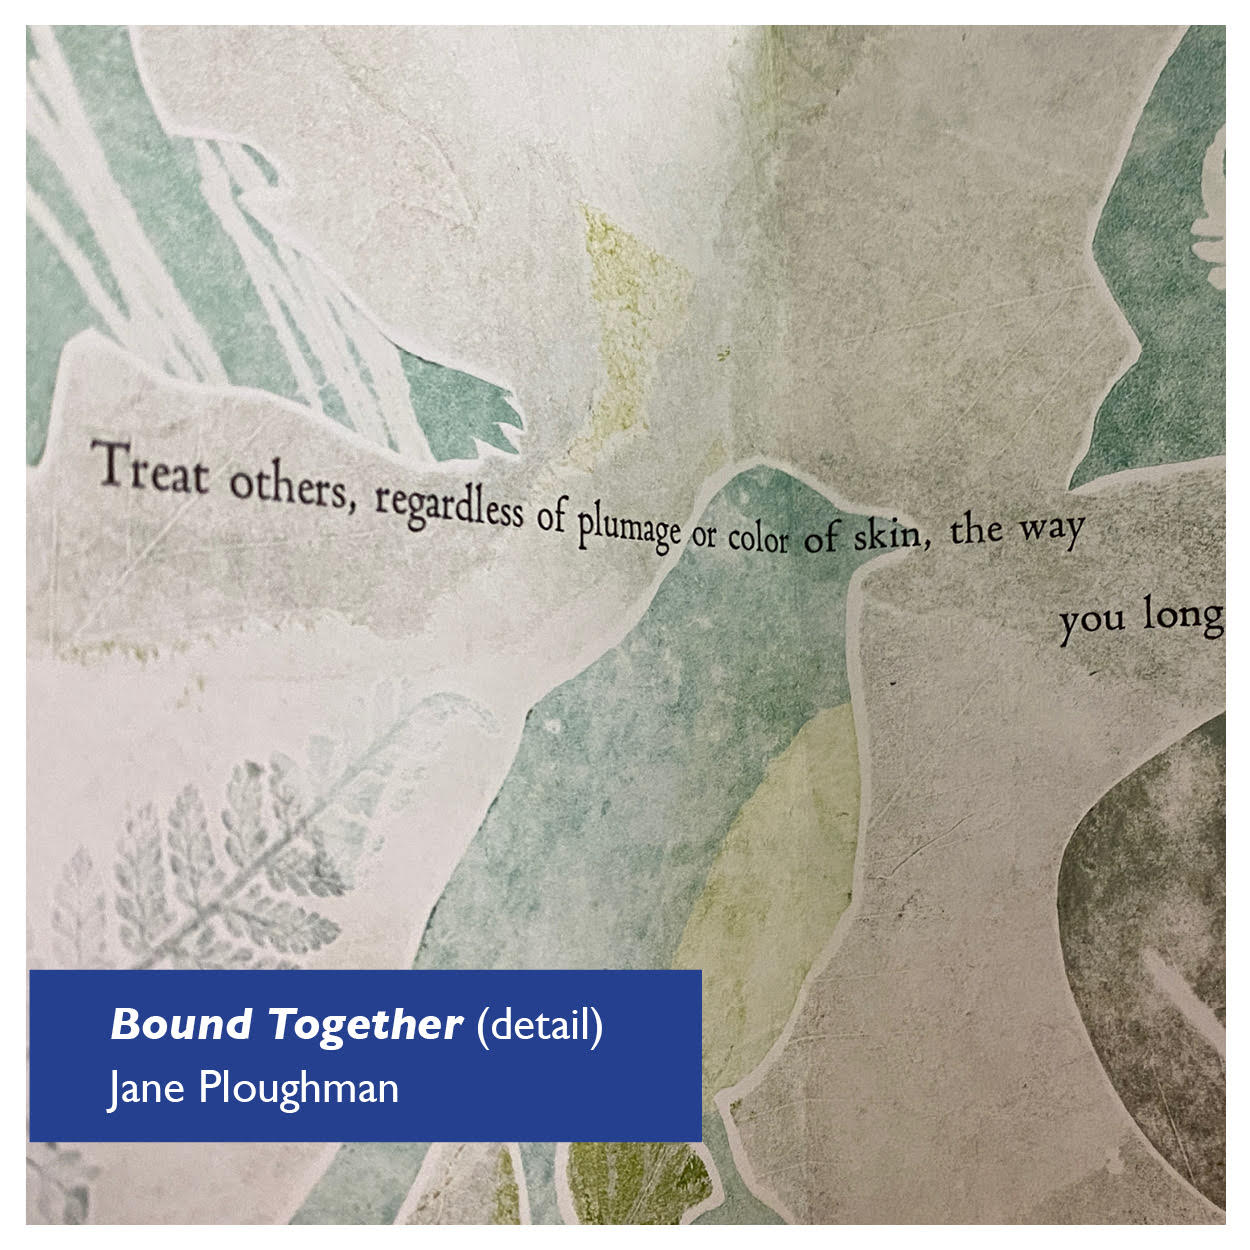 Three partial birds in pale green on a gray and cream background, with the words "Treat others, regardless of plumage or color of skin, the way you long" Detail image of an letterpress/monoprint artist book, © by Jane Ploughman and shown with permission.